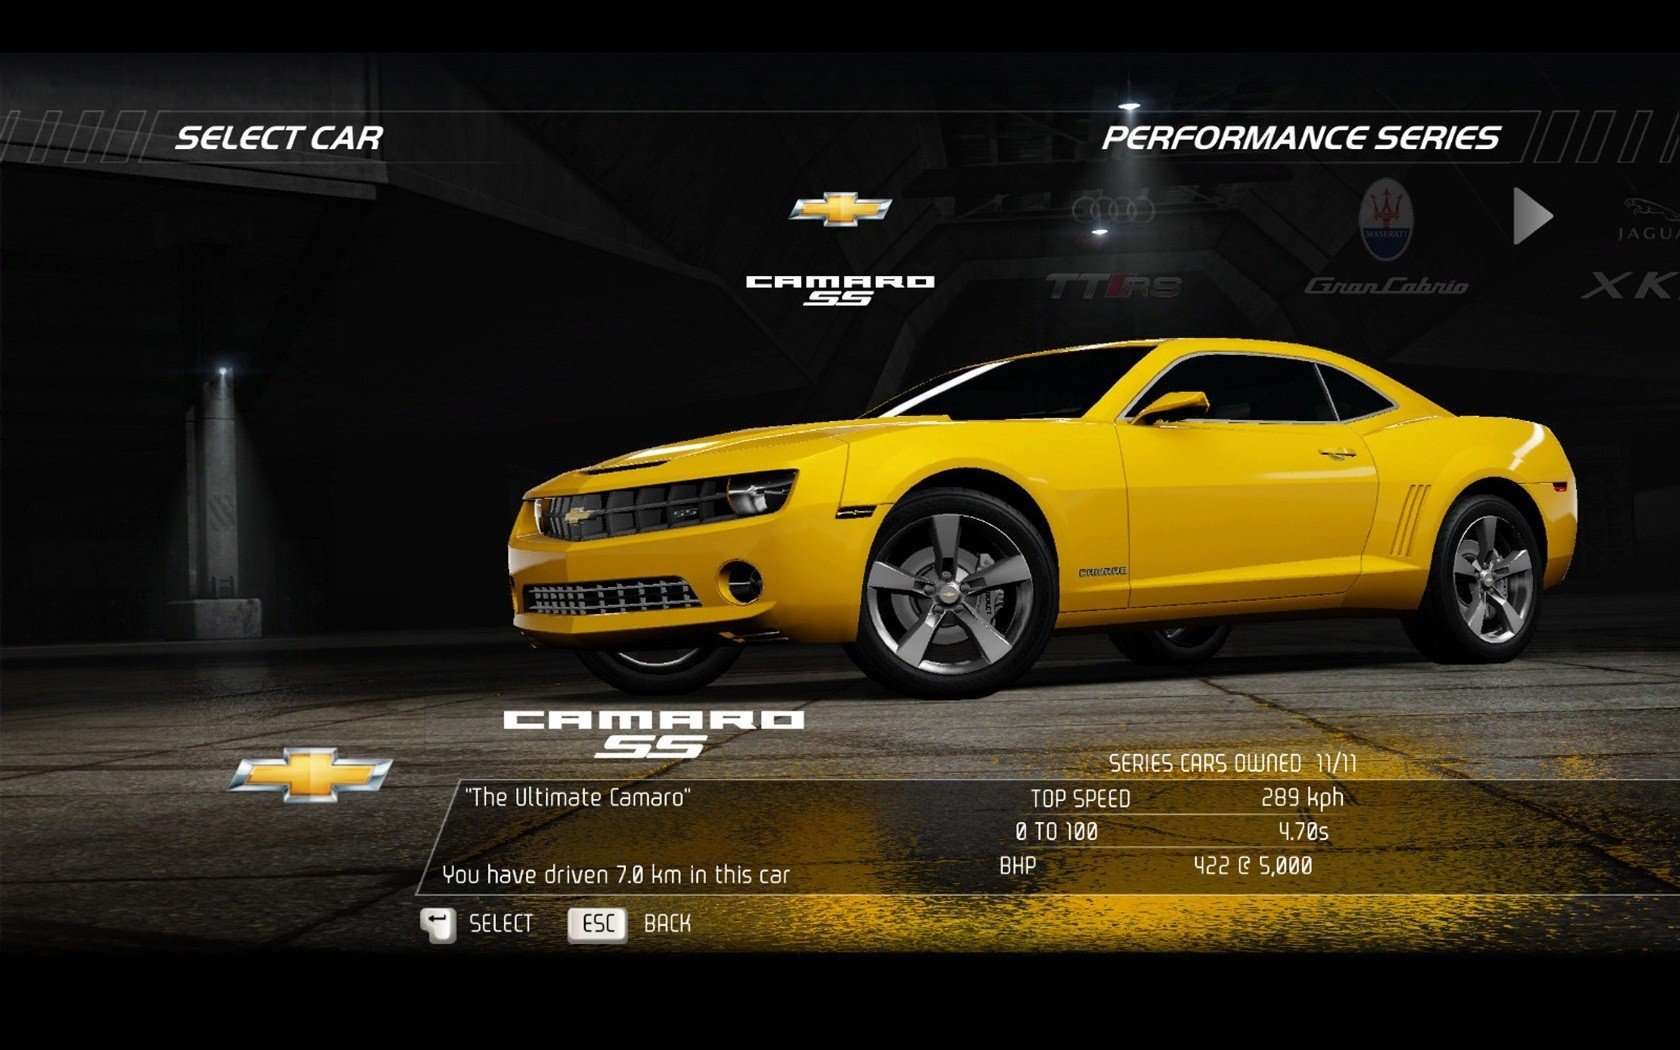 video, Games, Cars, Chevrolet, Camaro, Camaro, Ss, Chevrolet, Camaro, Ss, Need, For, Speed, Hot, Pursuit, Pc, Games Wallpaper